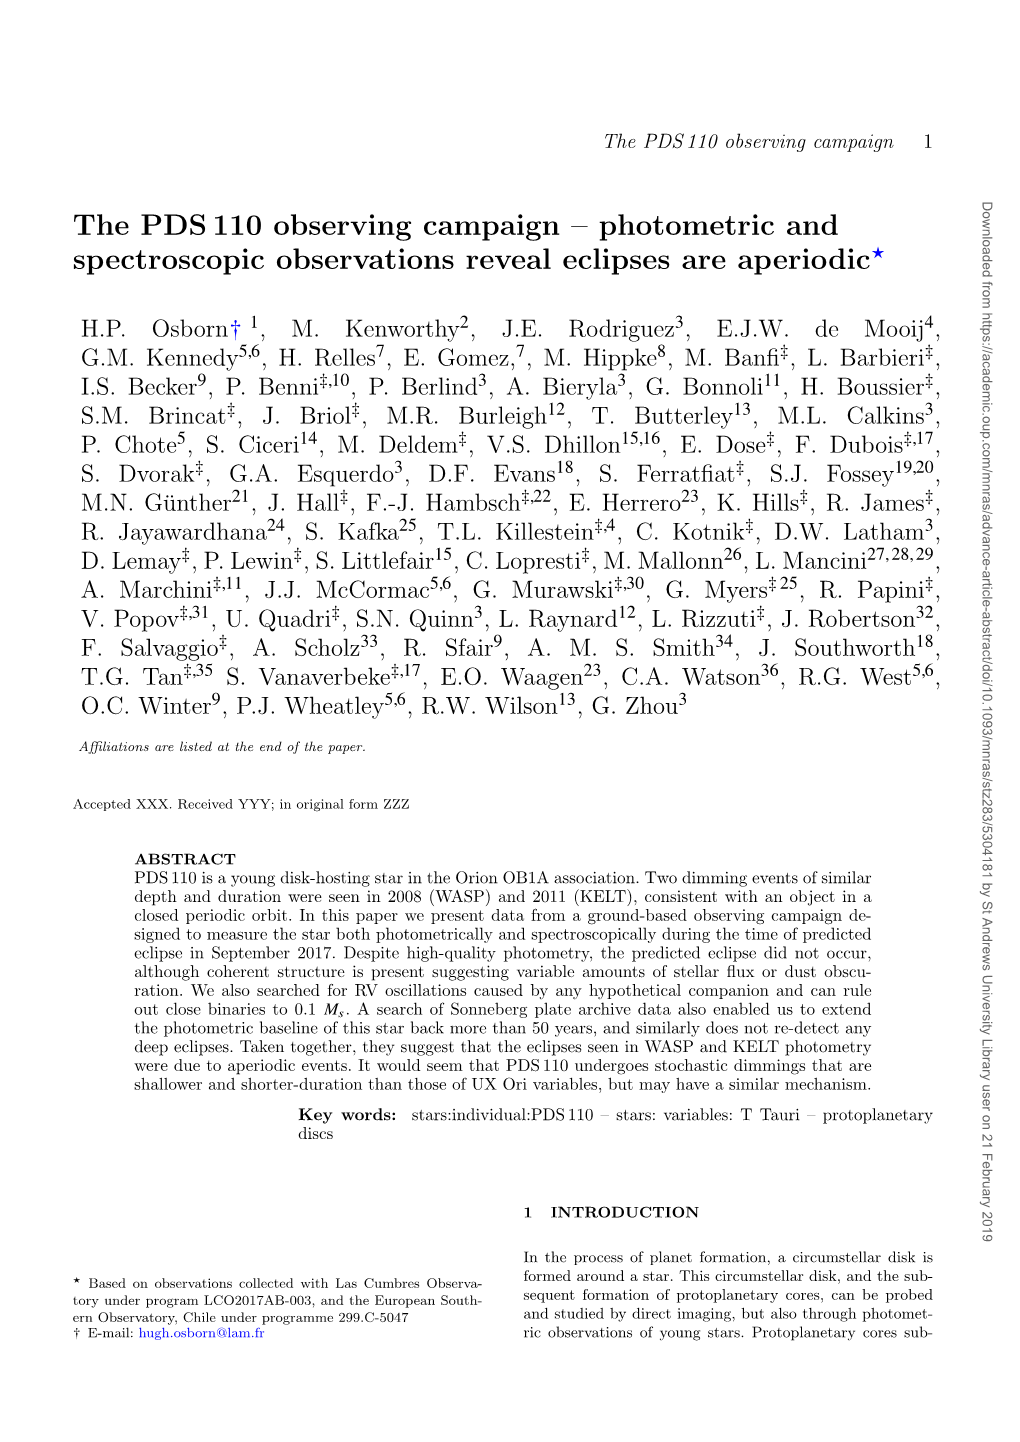 The PDS 110 Observing Campaign -- Photometric And